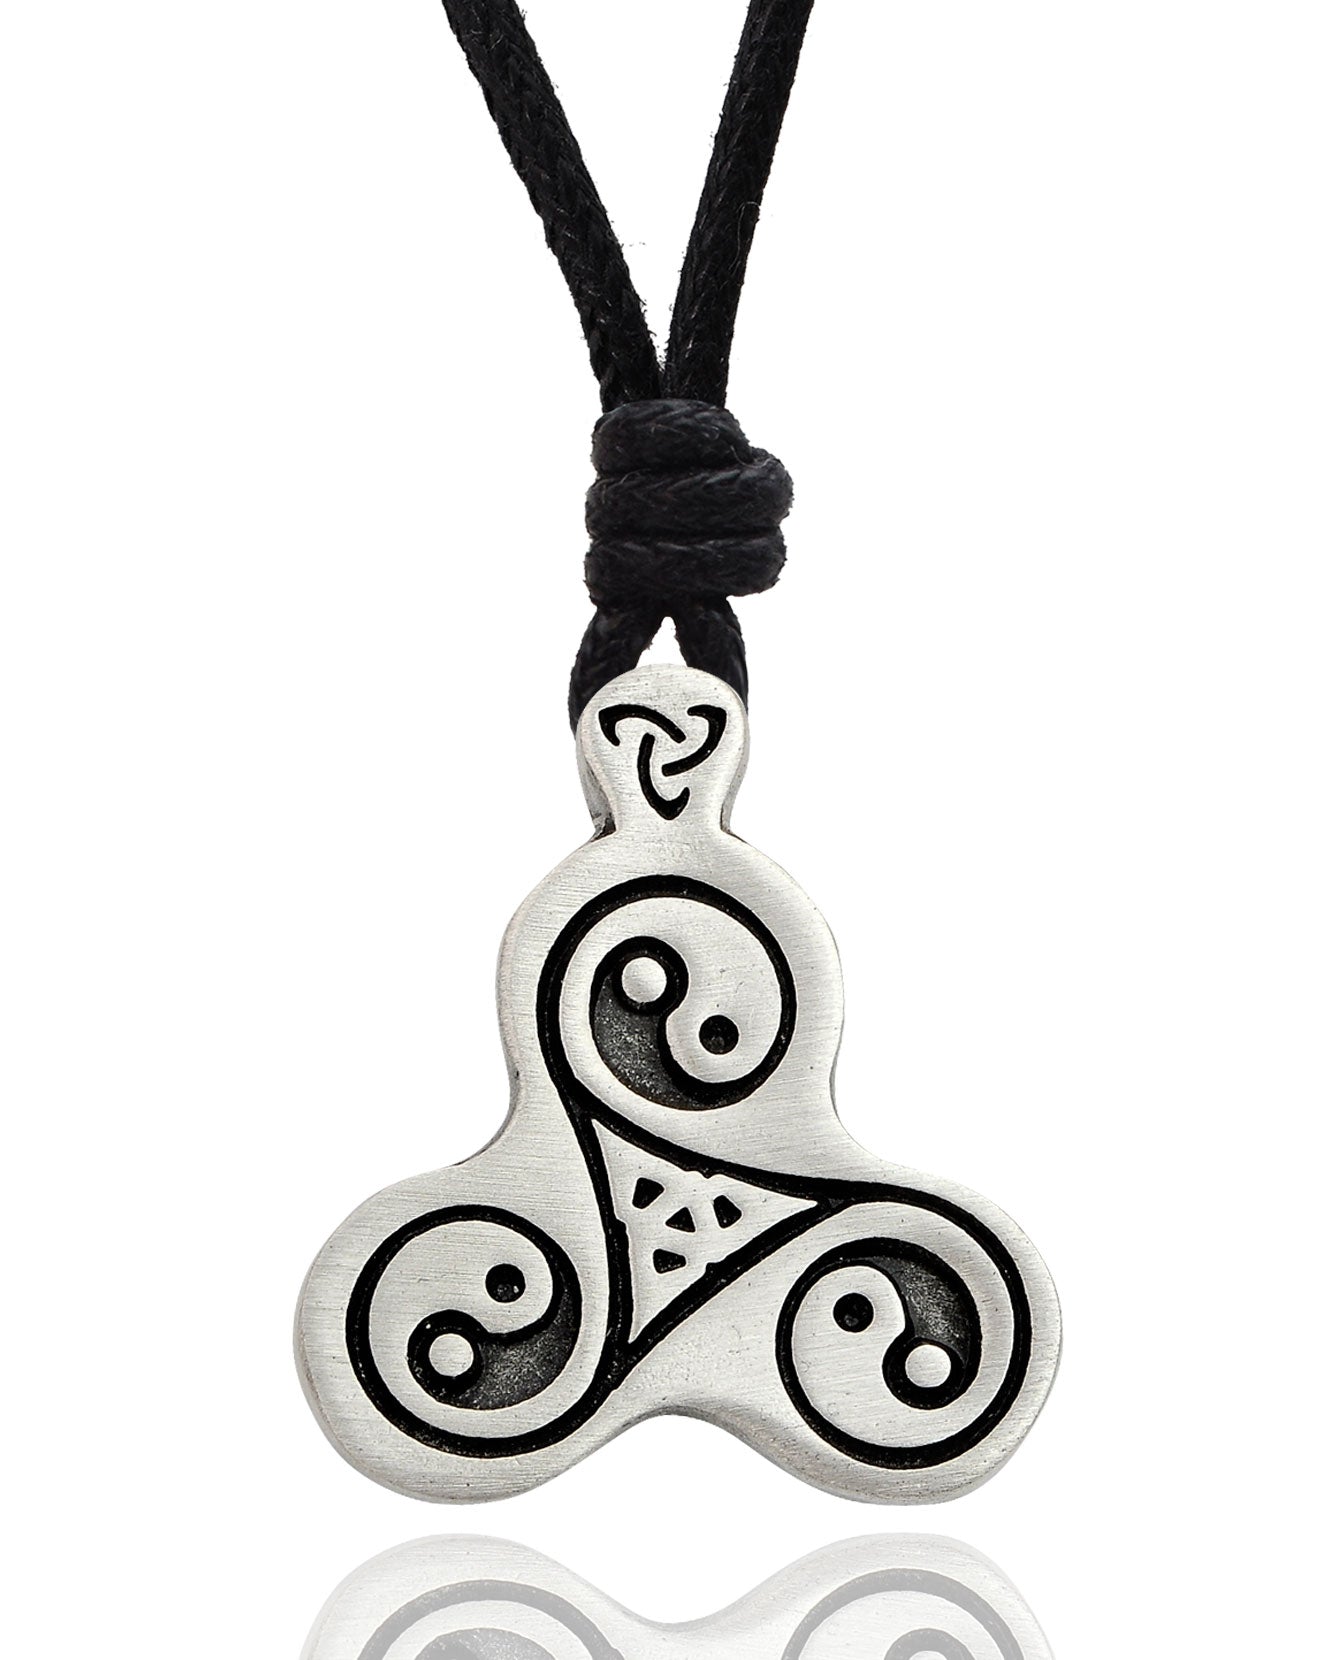 Yin Yang Triquetra Trilogy Silver Pewter Charm Necklace Pendant Jewelry